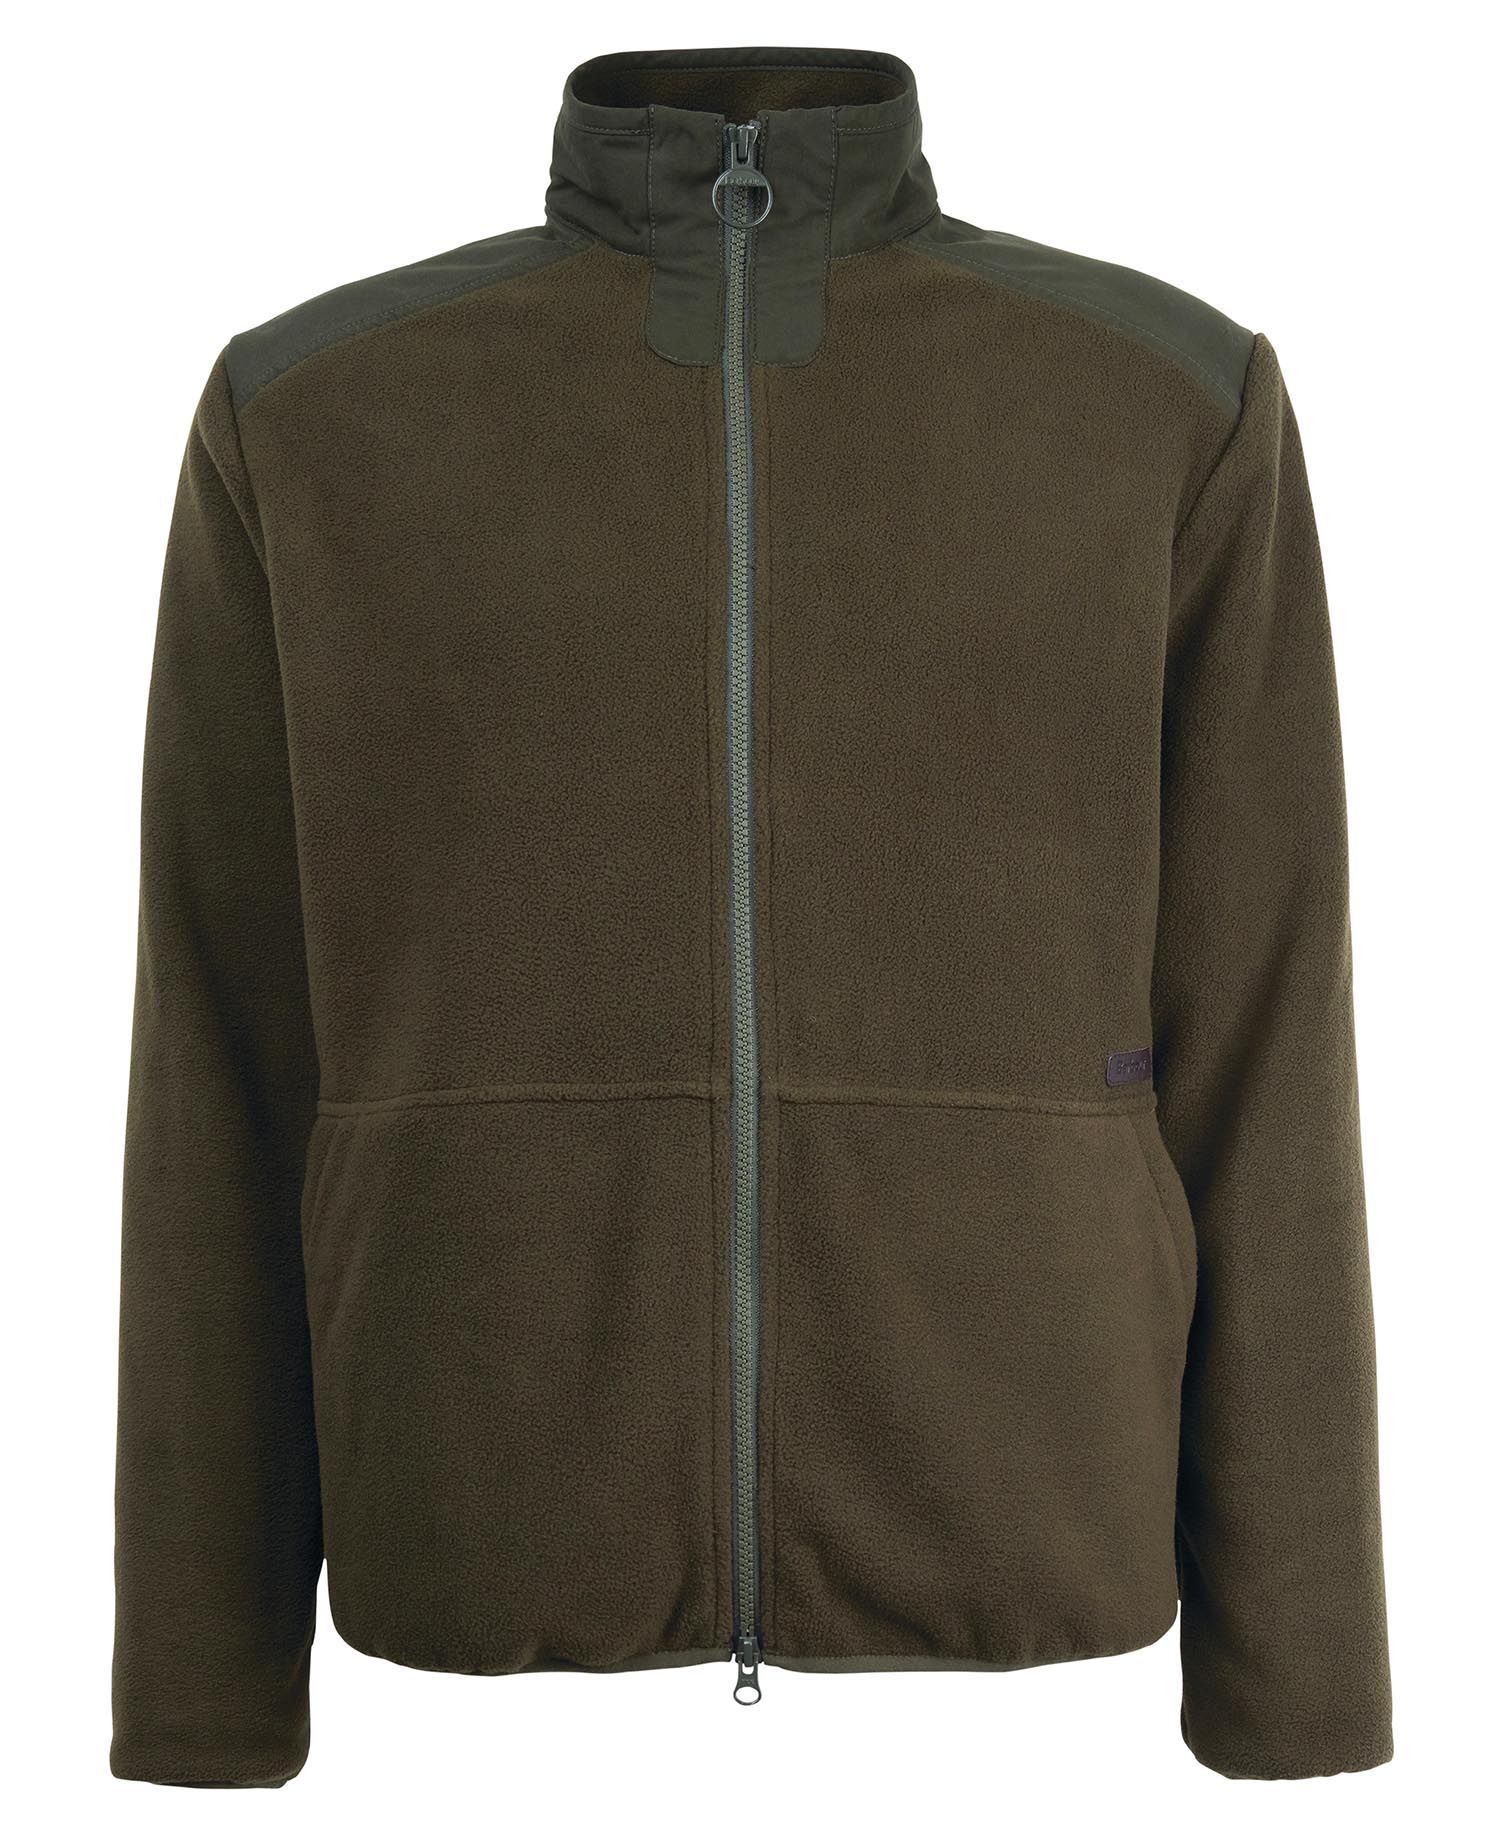 Barbour Country Fleece Jacket in Olive – The Lucky Knot Men's